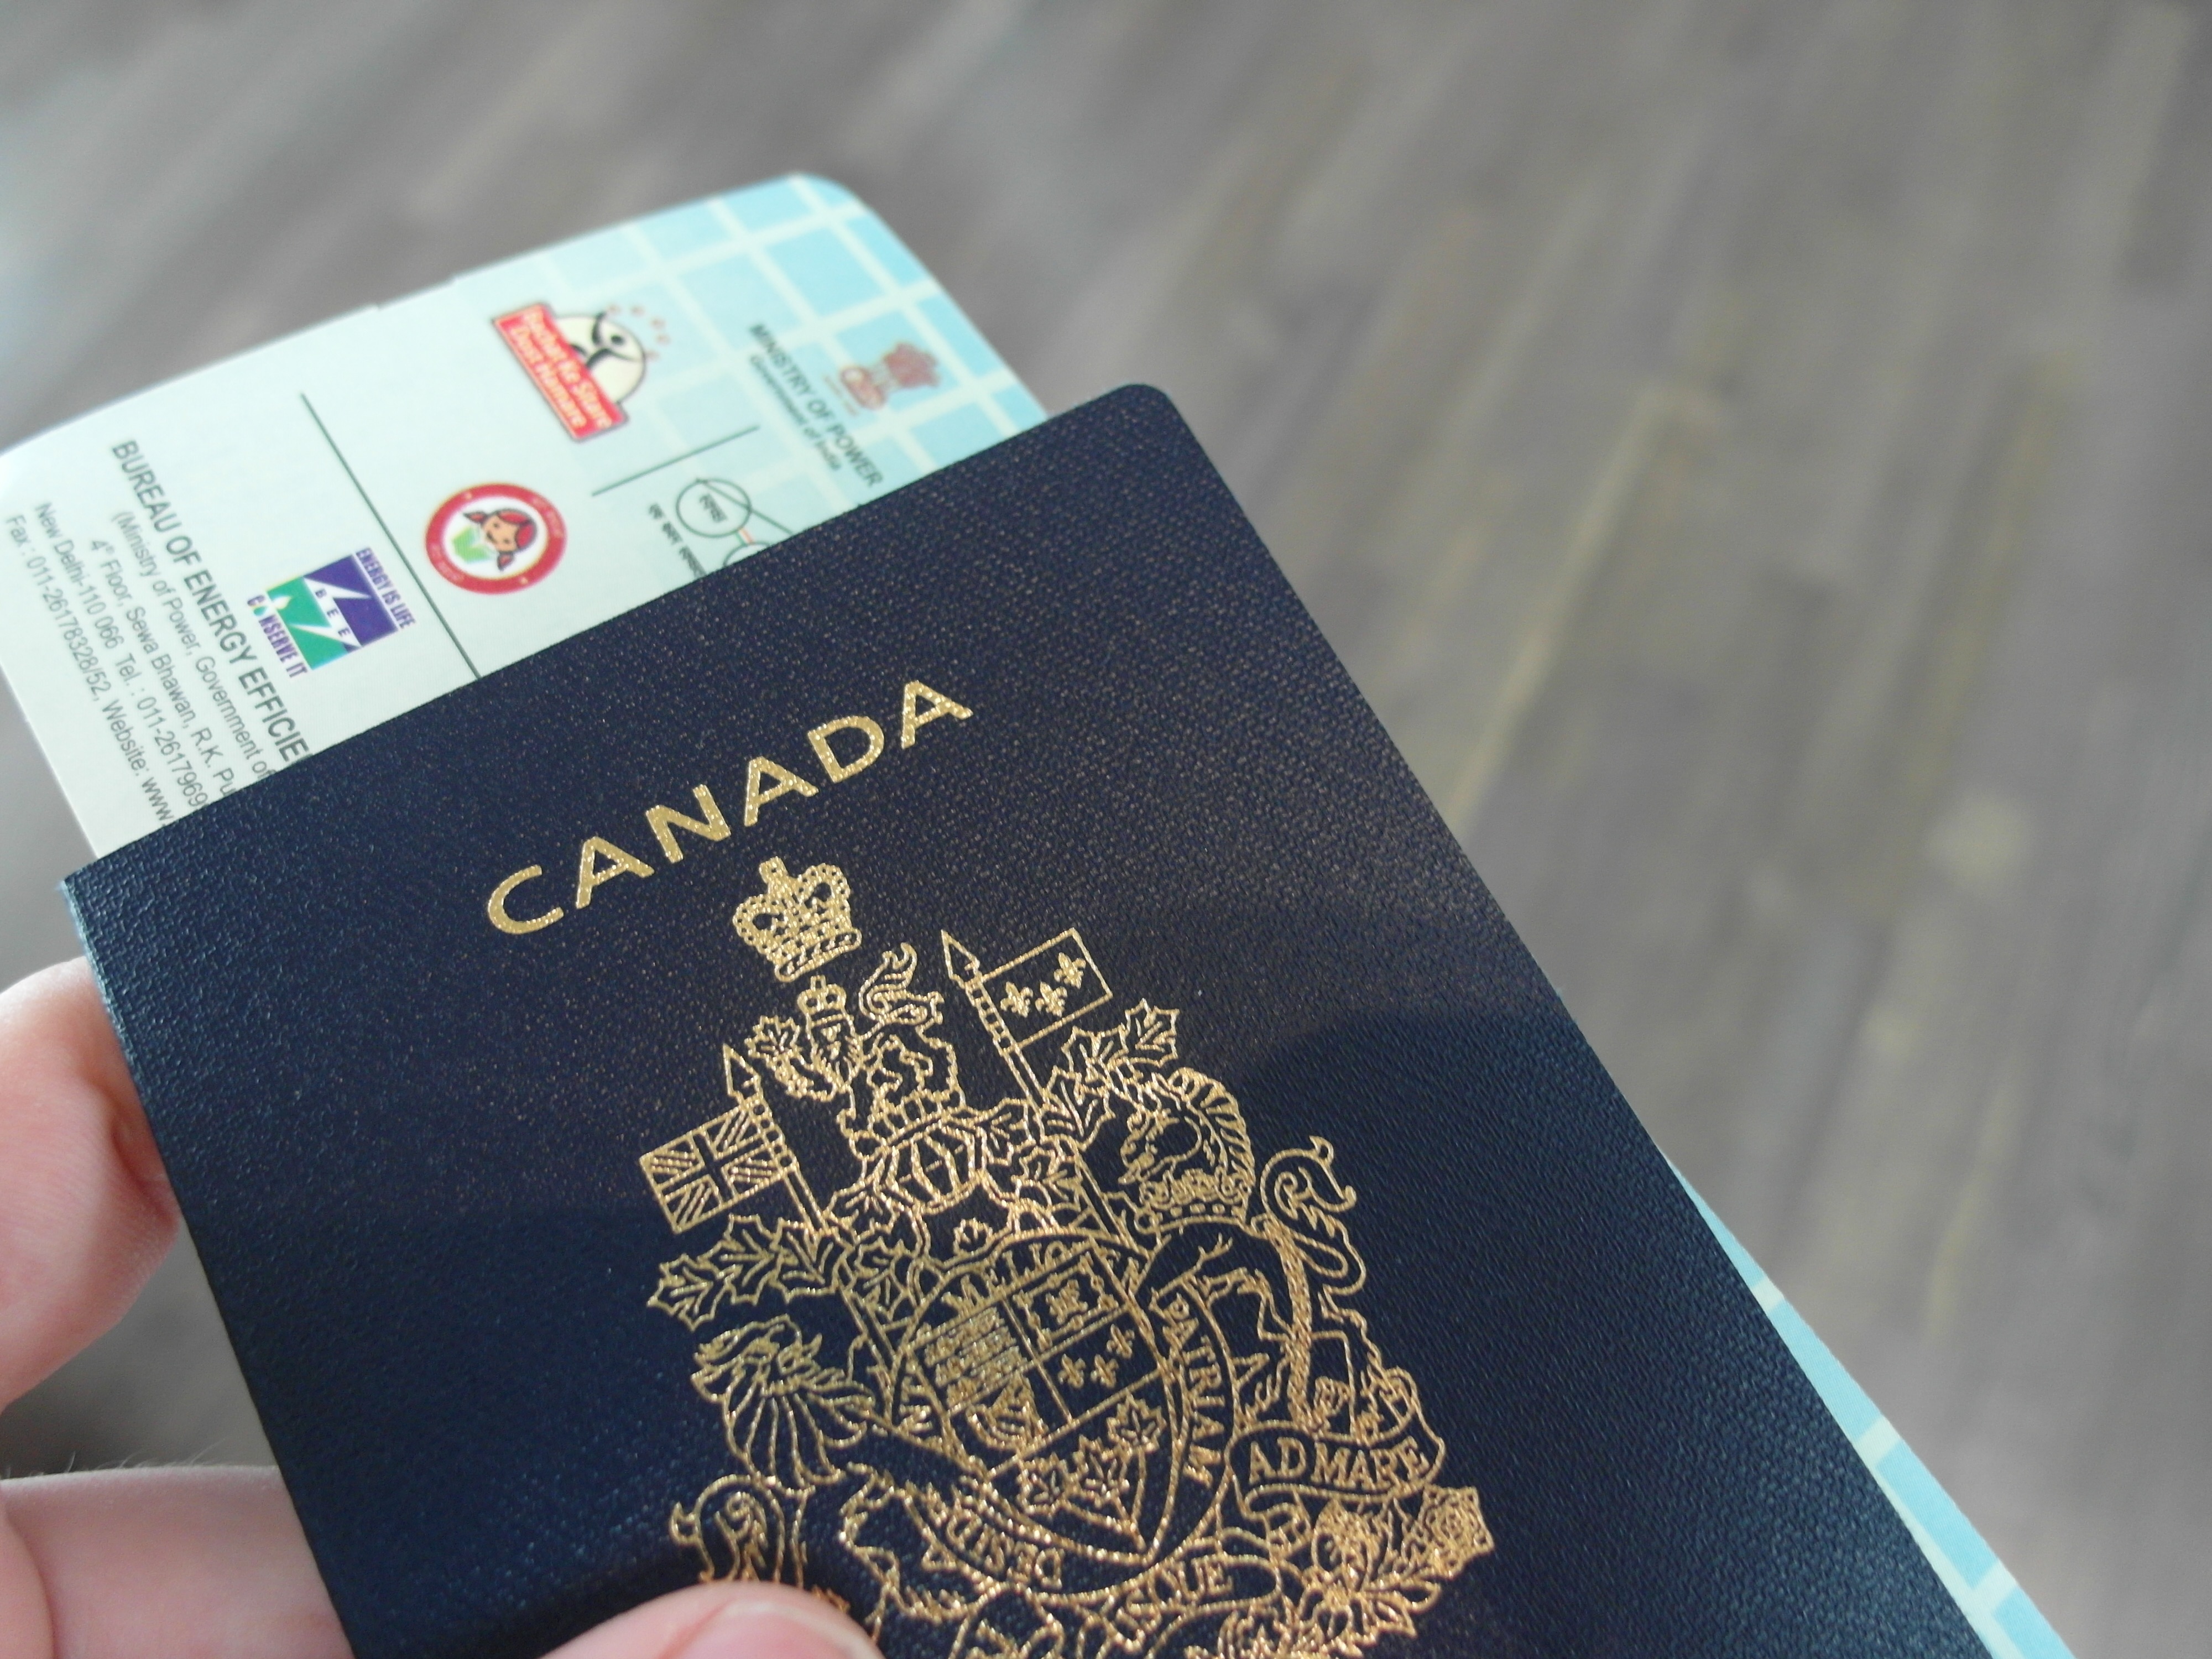 Vietnam Visa for Canadian Citizens Types, Requirements, and Tips